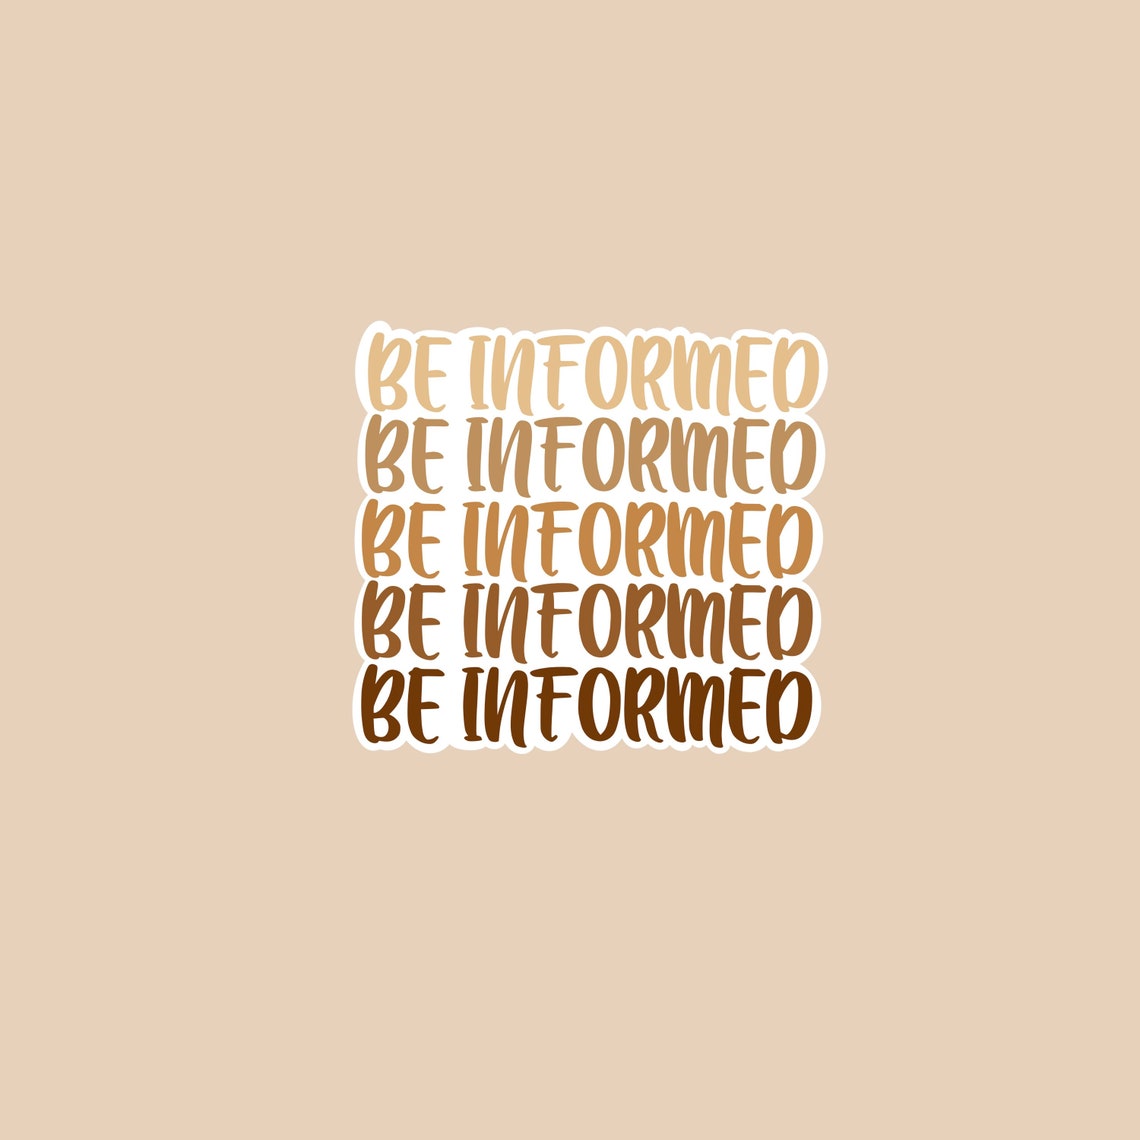 Be informed sticker neutral quote aesthetic sticker quote | Etsy